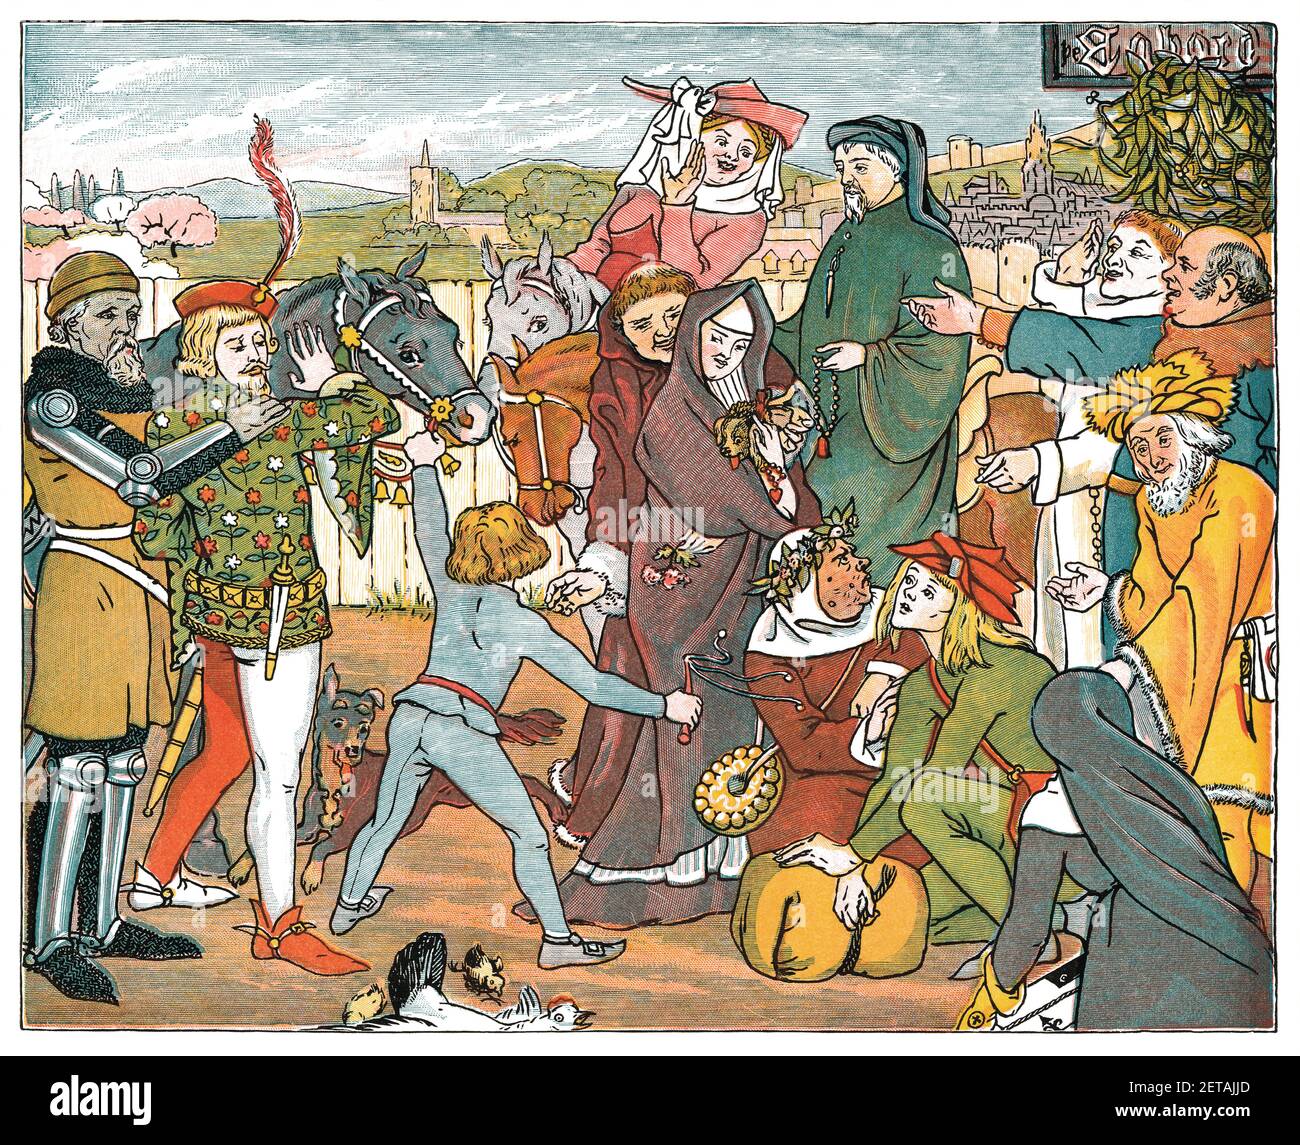 1895 Victorian illustration of the Canterbury pilgrims from Geoffrey Chaucer’s Canterbury Tales. From the book Chaucer For Children, written and illustrated by Mrs. H. R. Haweis. Stock Photo